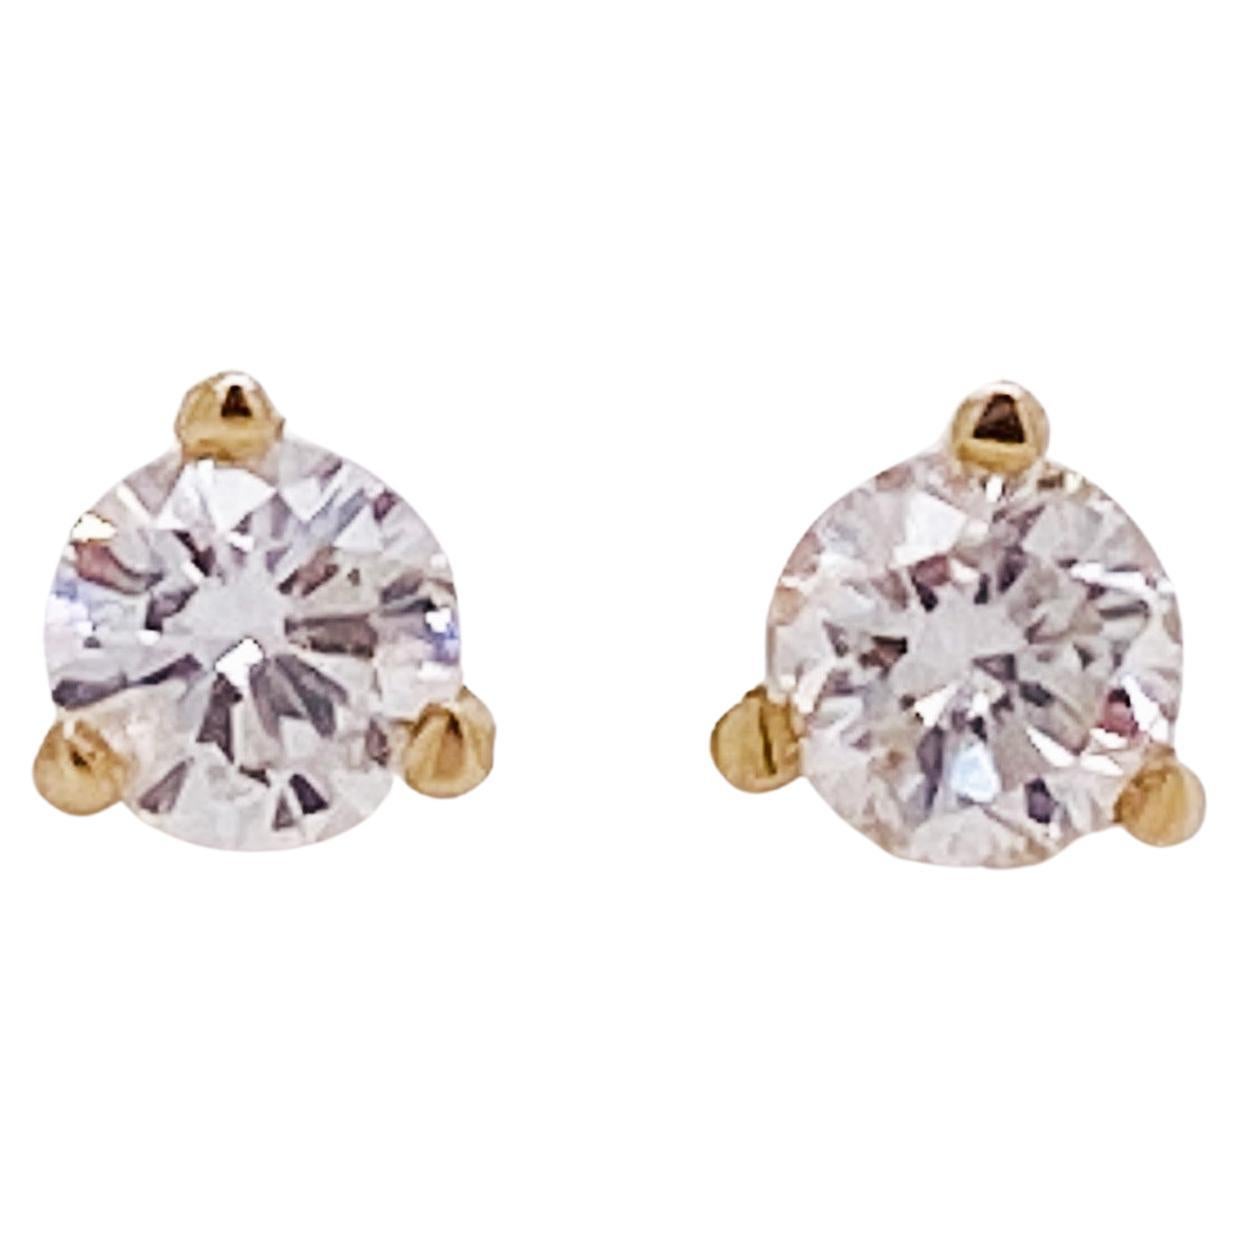 Petite Martini Diamond Stud Earrings .20 Carats in 14k Yellow/White/Rose Gold LV For Sale